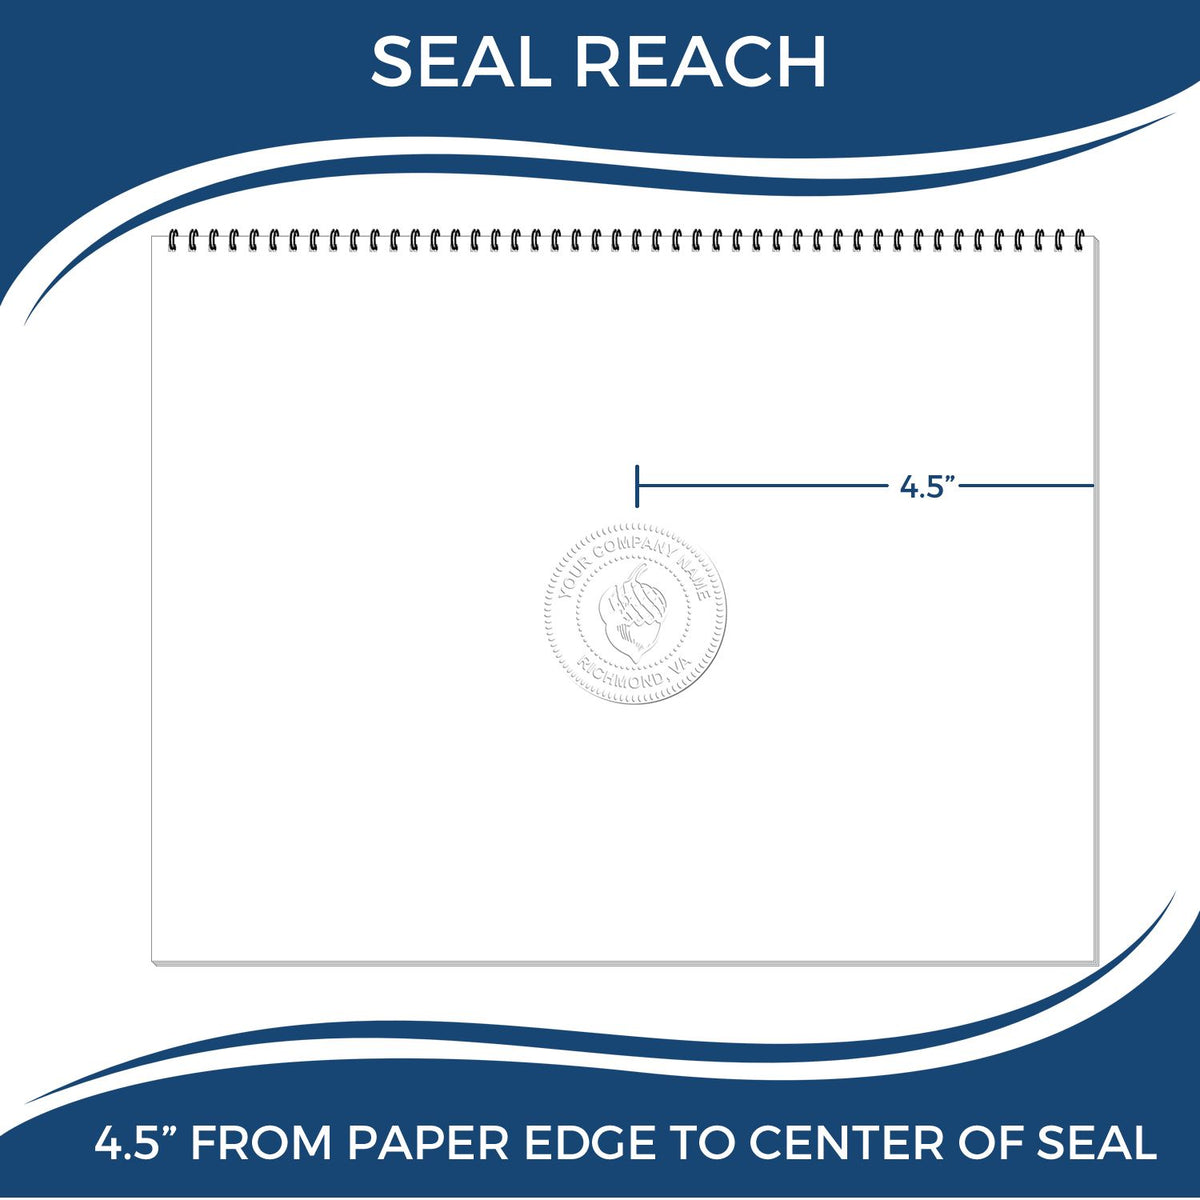 An infographic showing the seal reach which is represented by a ruler and a miniature seal image of the Extended Long Reach District of Columbia Surveyor Embosser